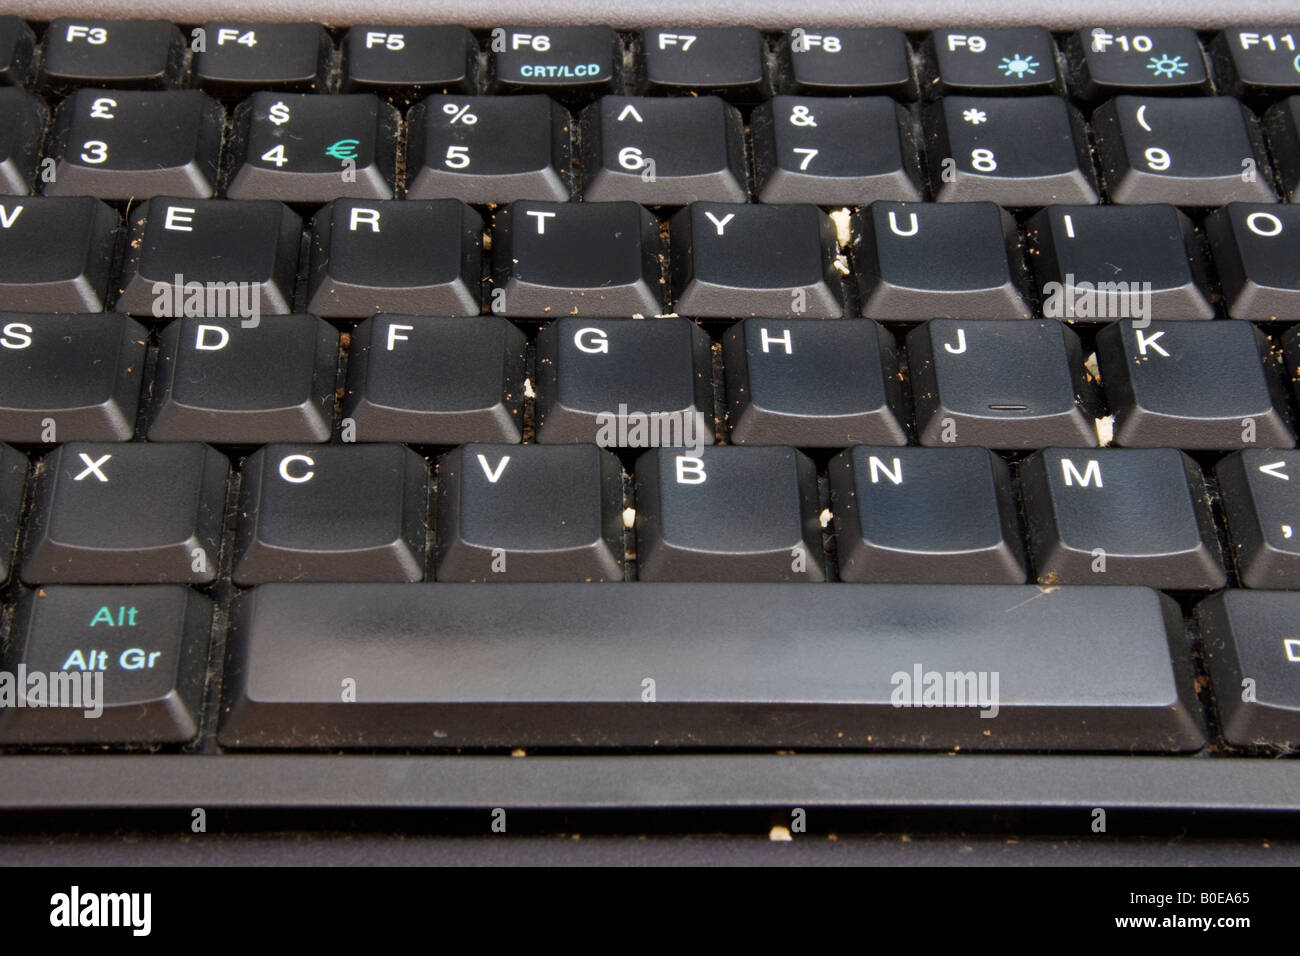 A dirty computer keyboard with crumbs of food between the keys harbouring harmful bacteria. Stock Photo